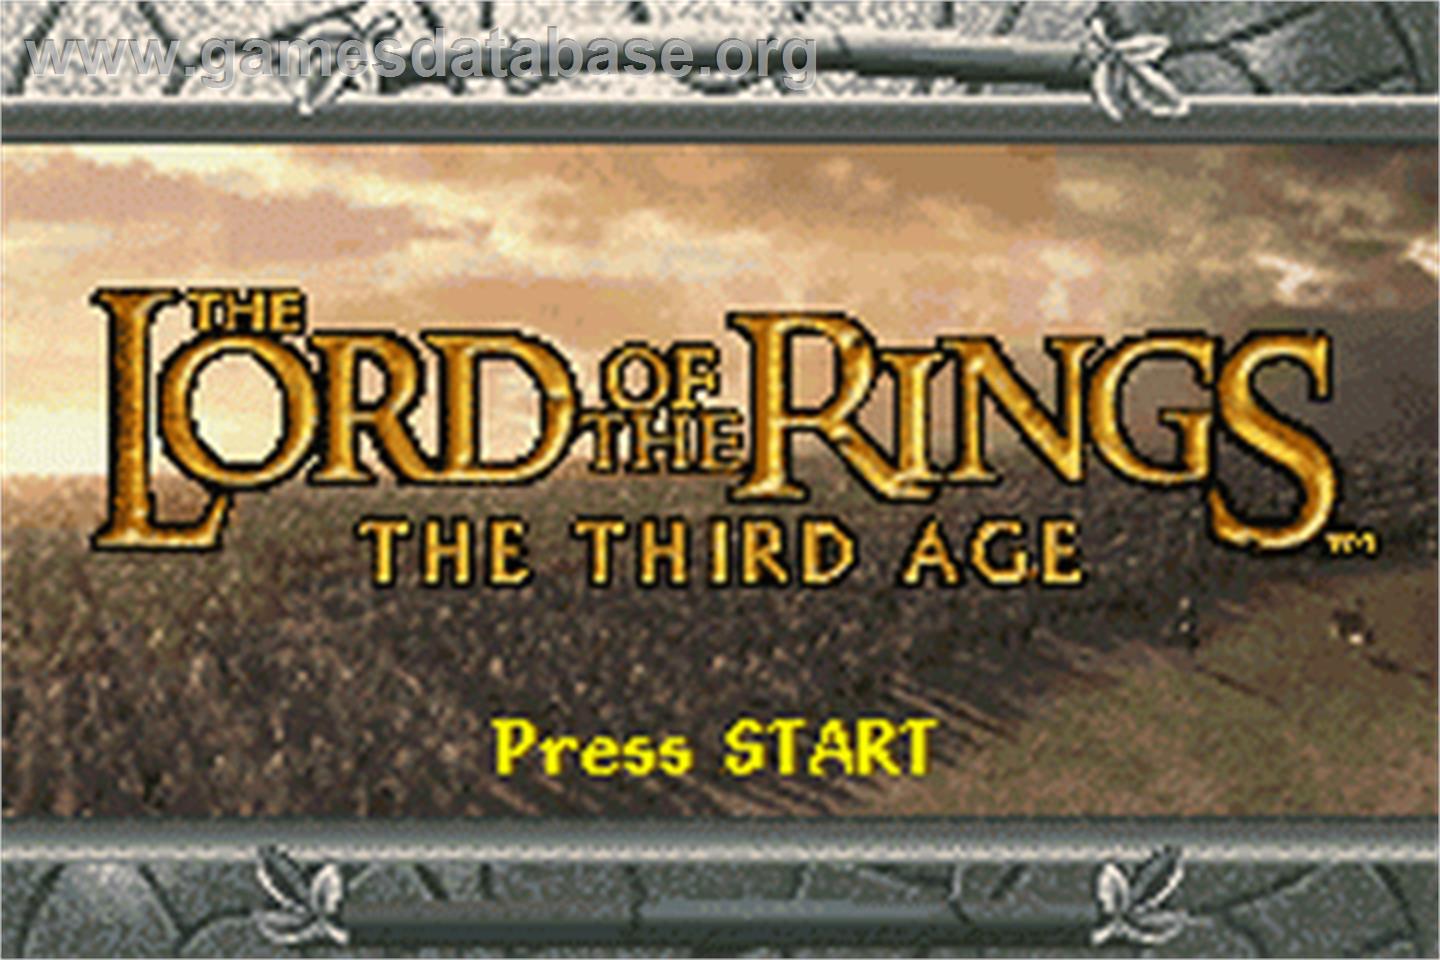 Lord of the Rings: The Third Age - Nintendo Game Boy Advance - Artwork - Title Screen